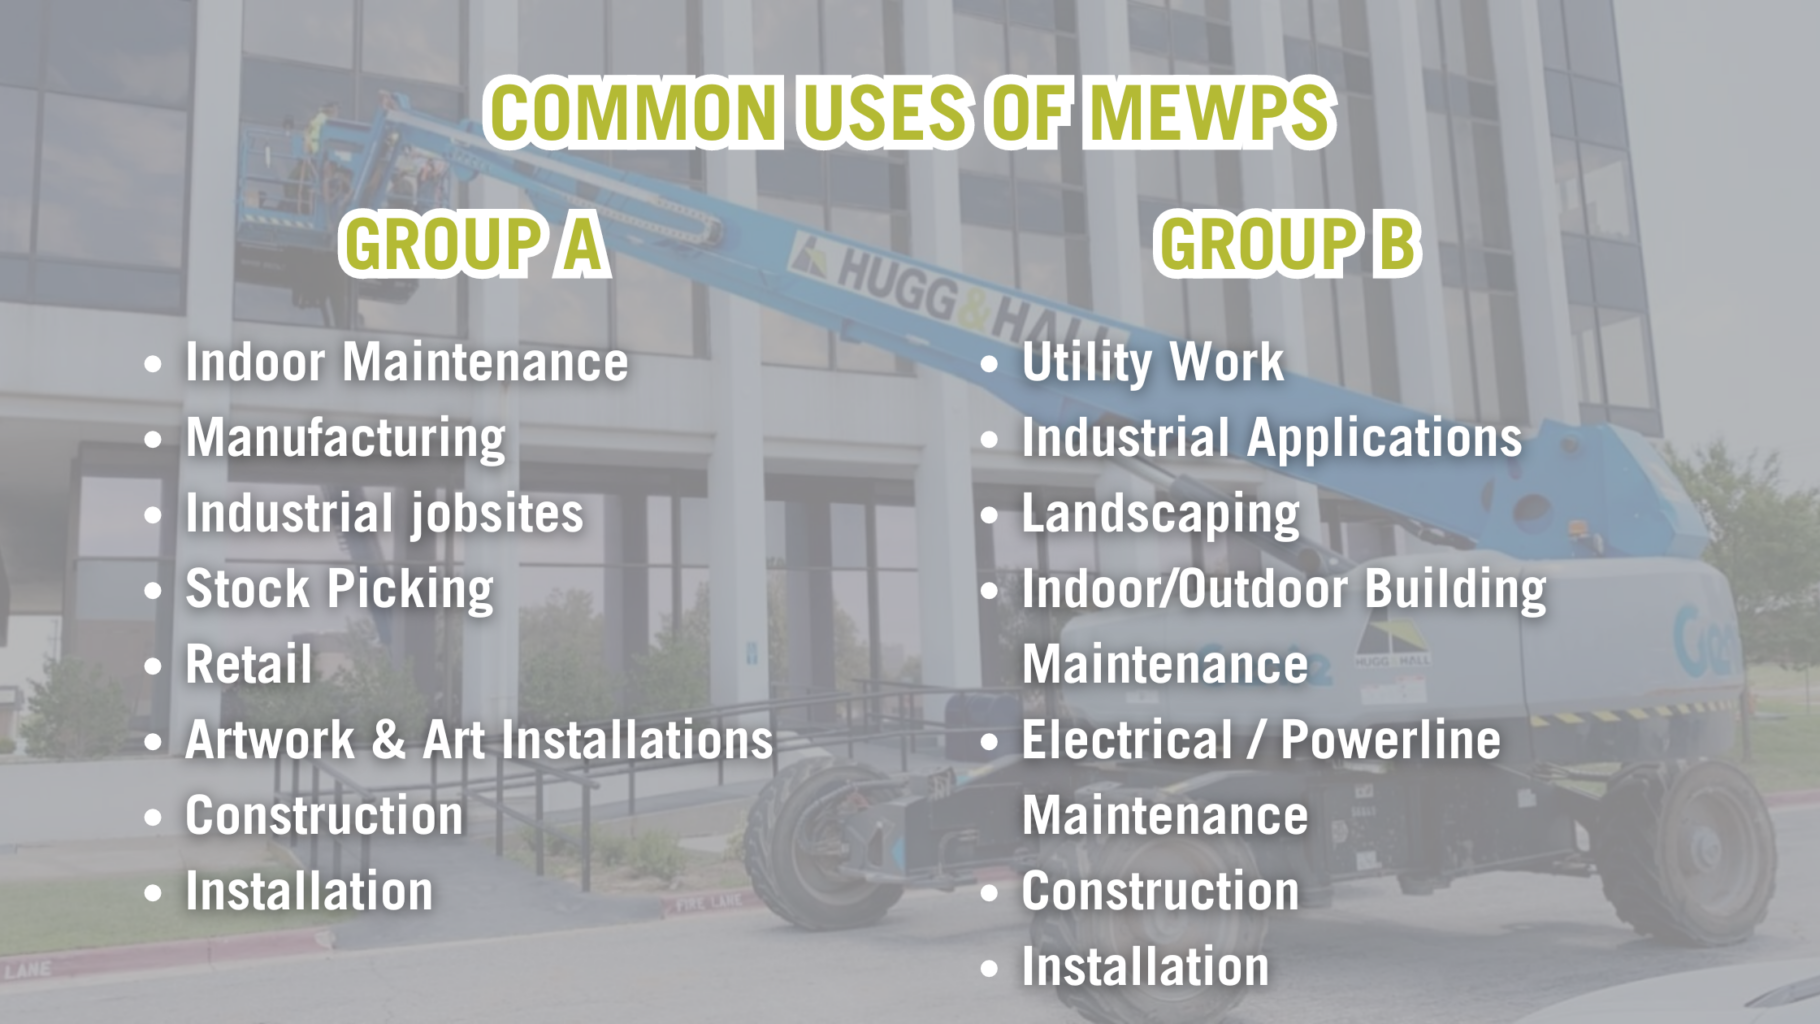 Common uses of MEWPs. Group A: indoor maintenance, manufacturing, industrial jobsites, stock picking, retail, artwork/art installations, construction, installation. Group B: utility work, industrial applications, landscaping, indoor/outdoor building maintenance, electrical/powerline maintenance, construction, installation. 